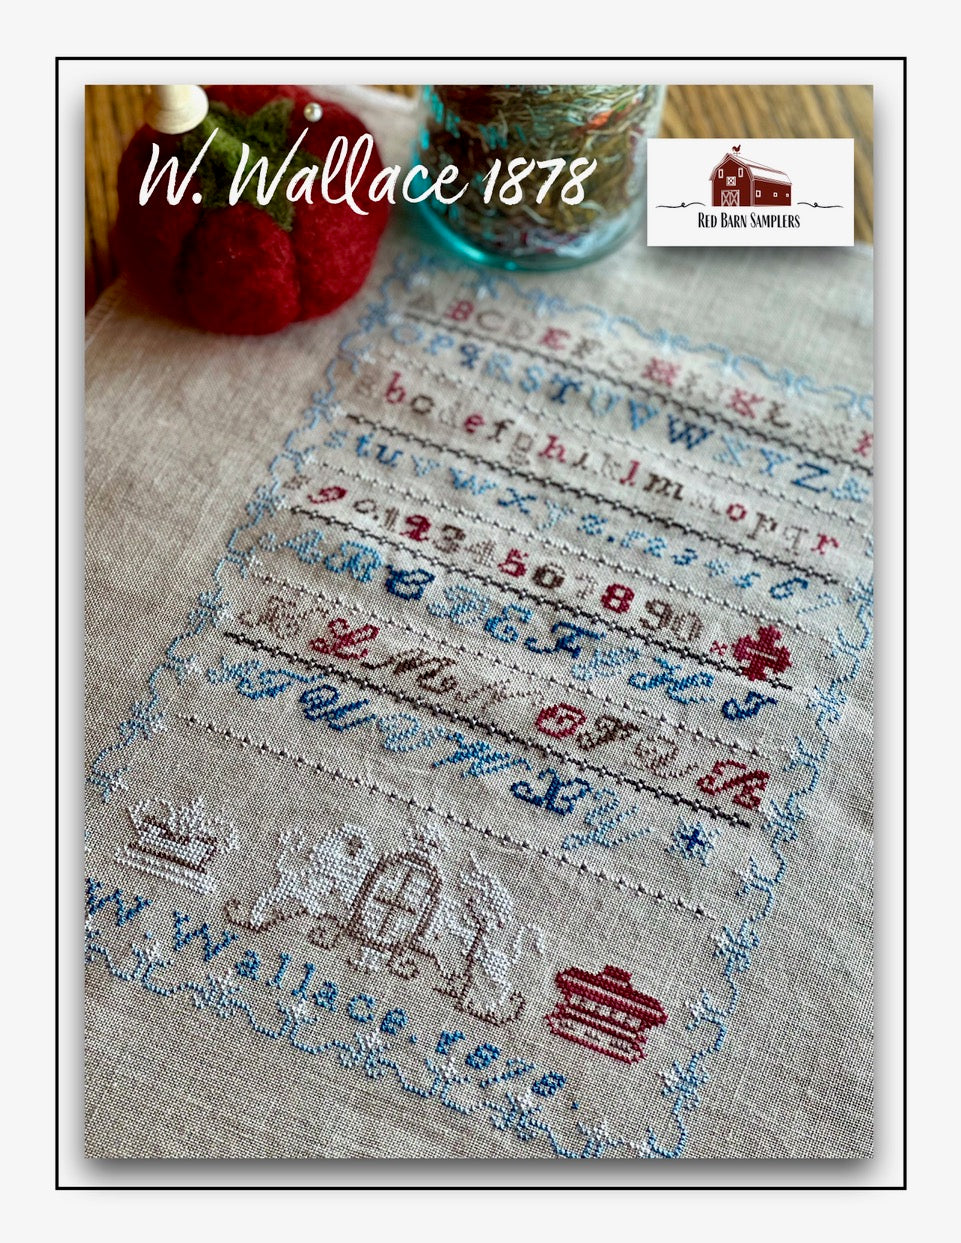 W. Wallace 1878 by Red Barn Samplers